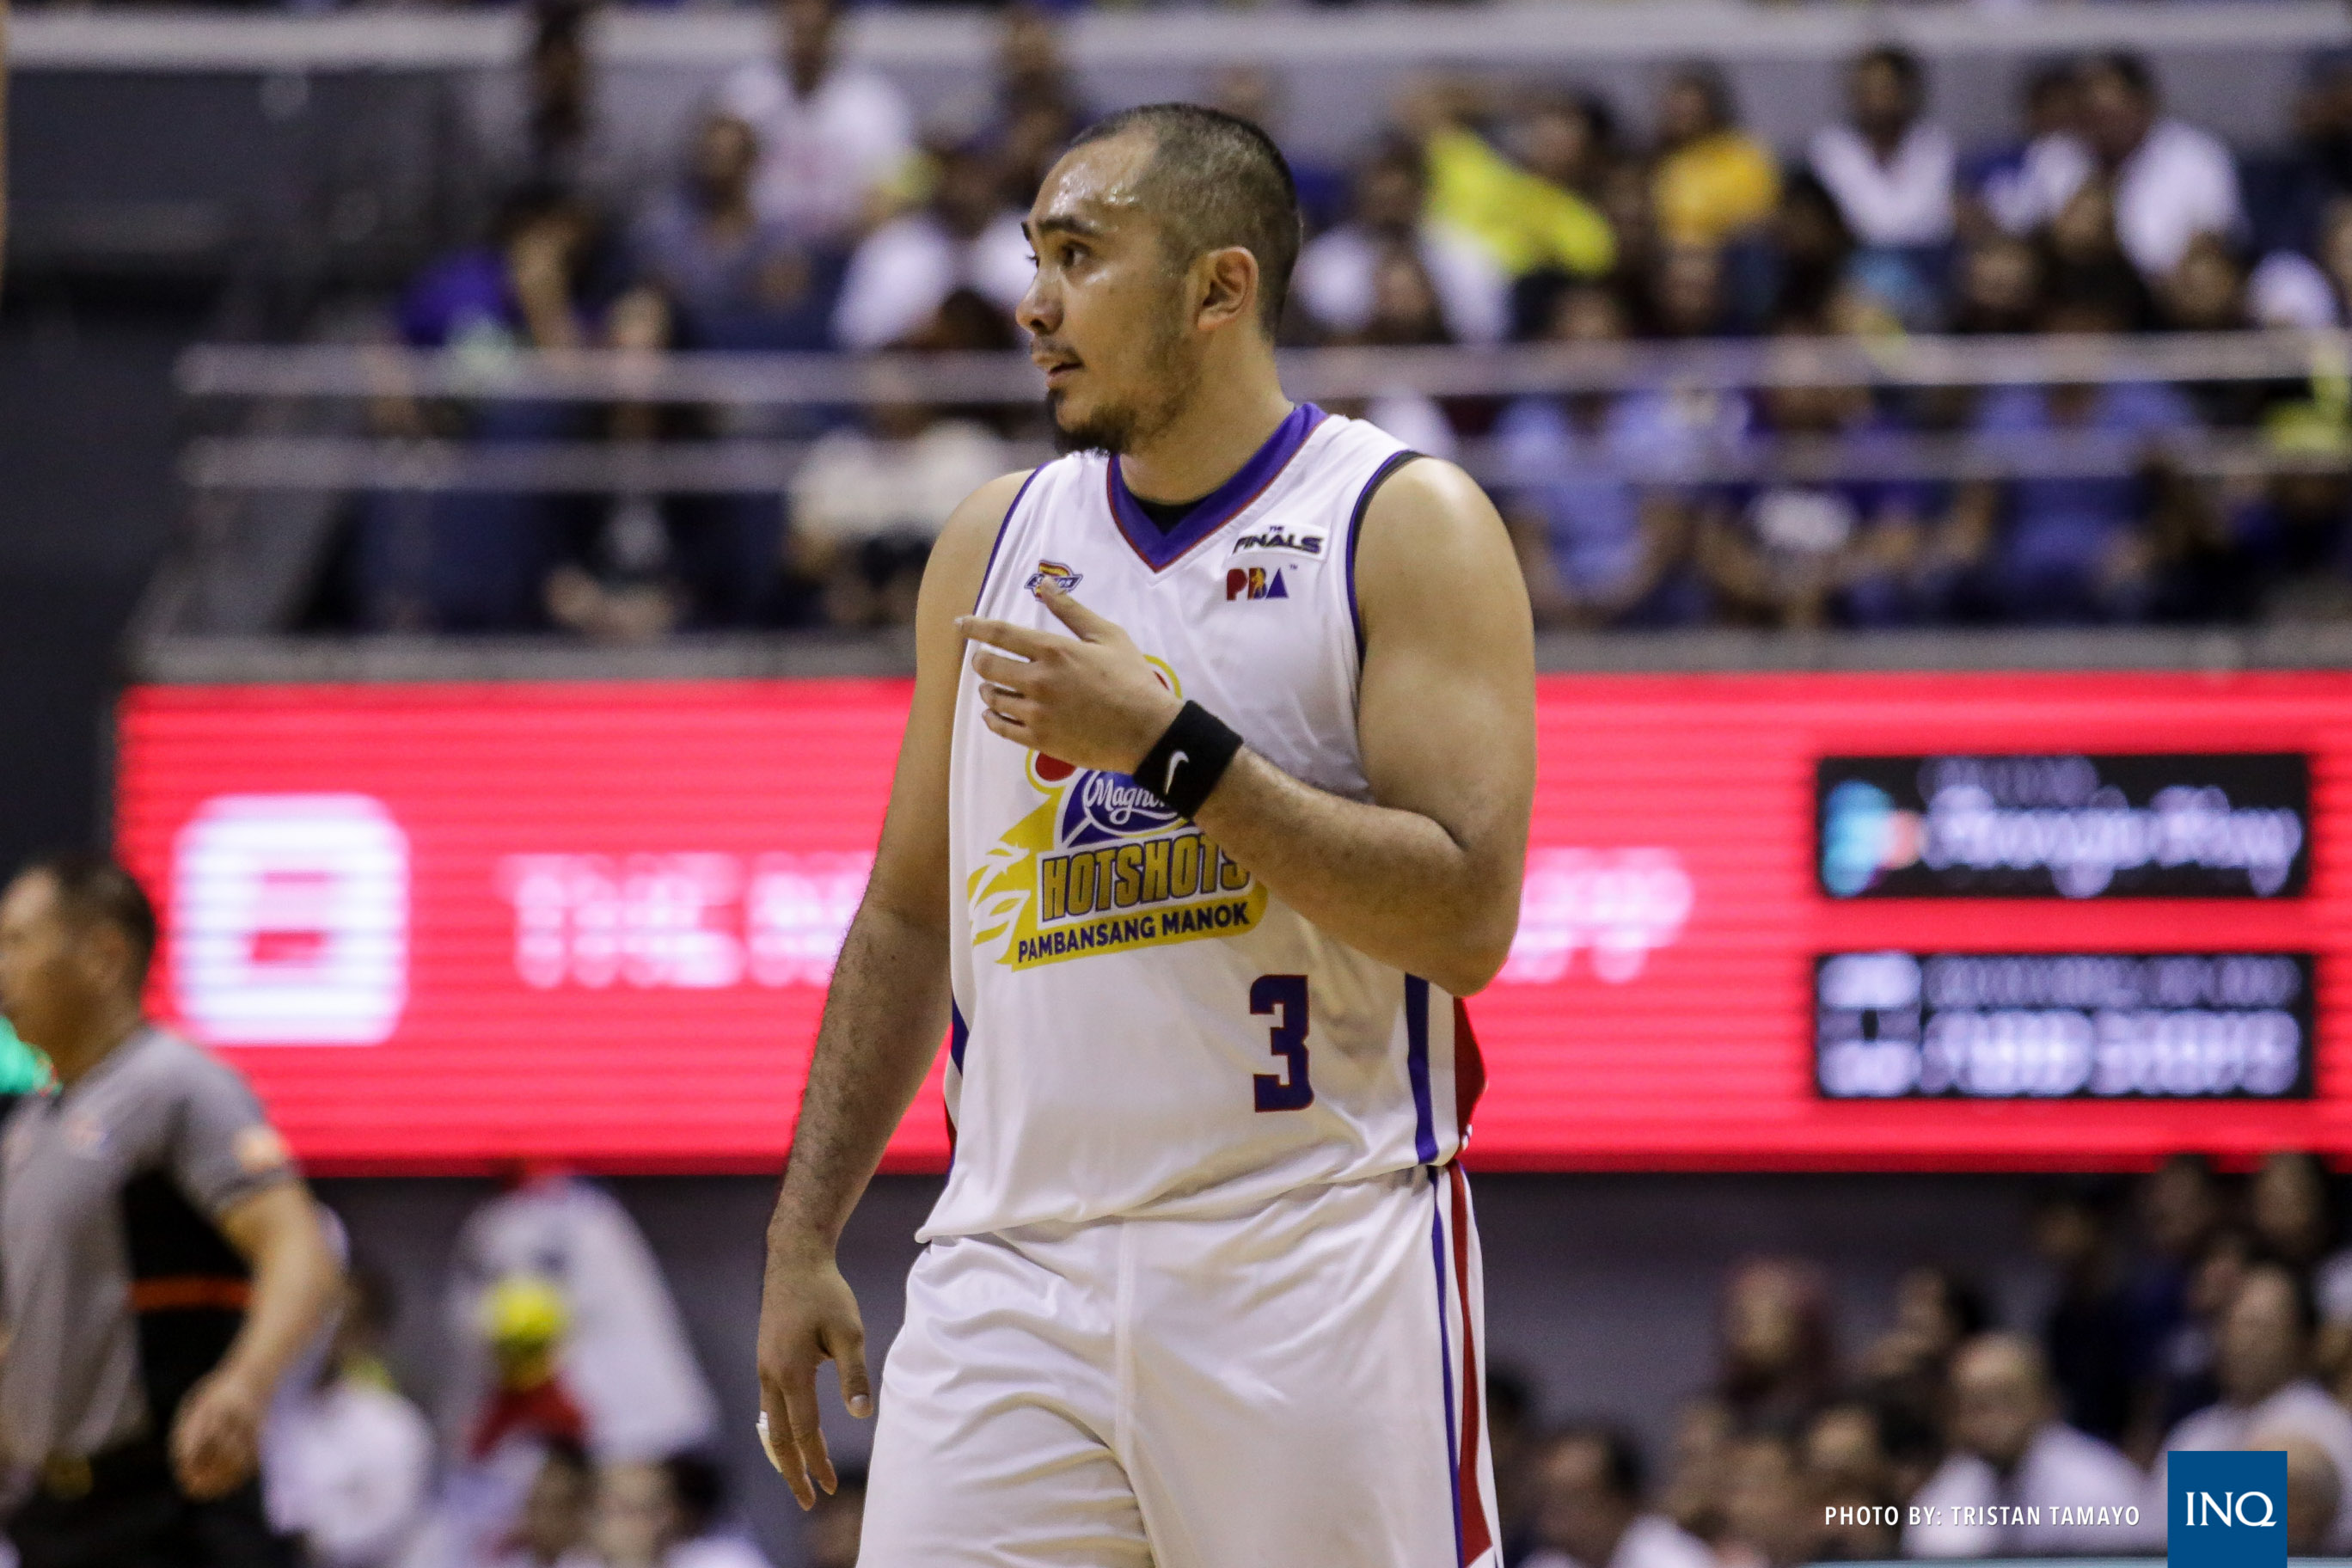 Lethal weapon: Paul Lee nails winner as Magnolia escapes Alaska for 3-2 lead